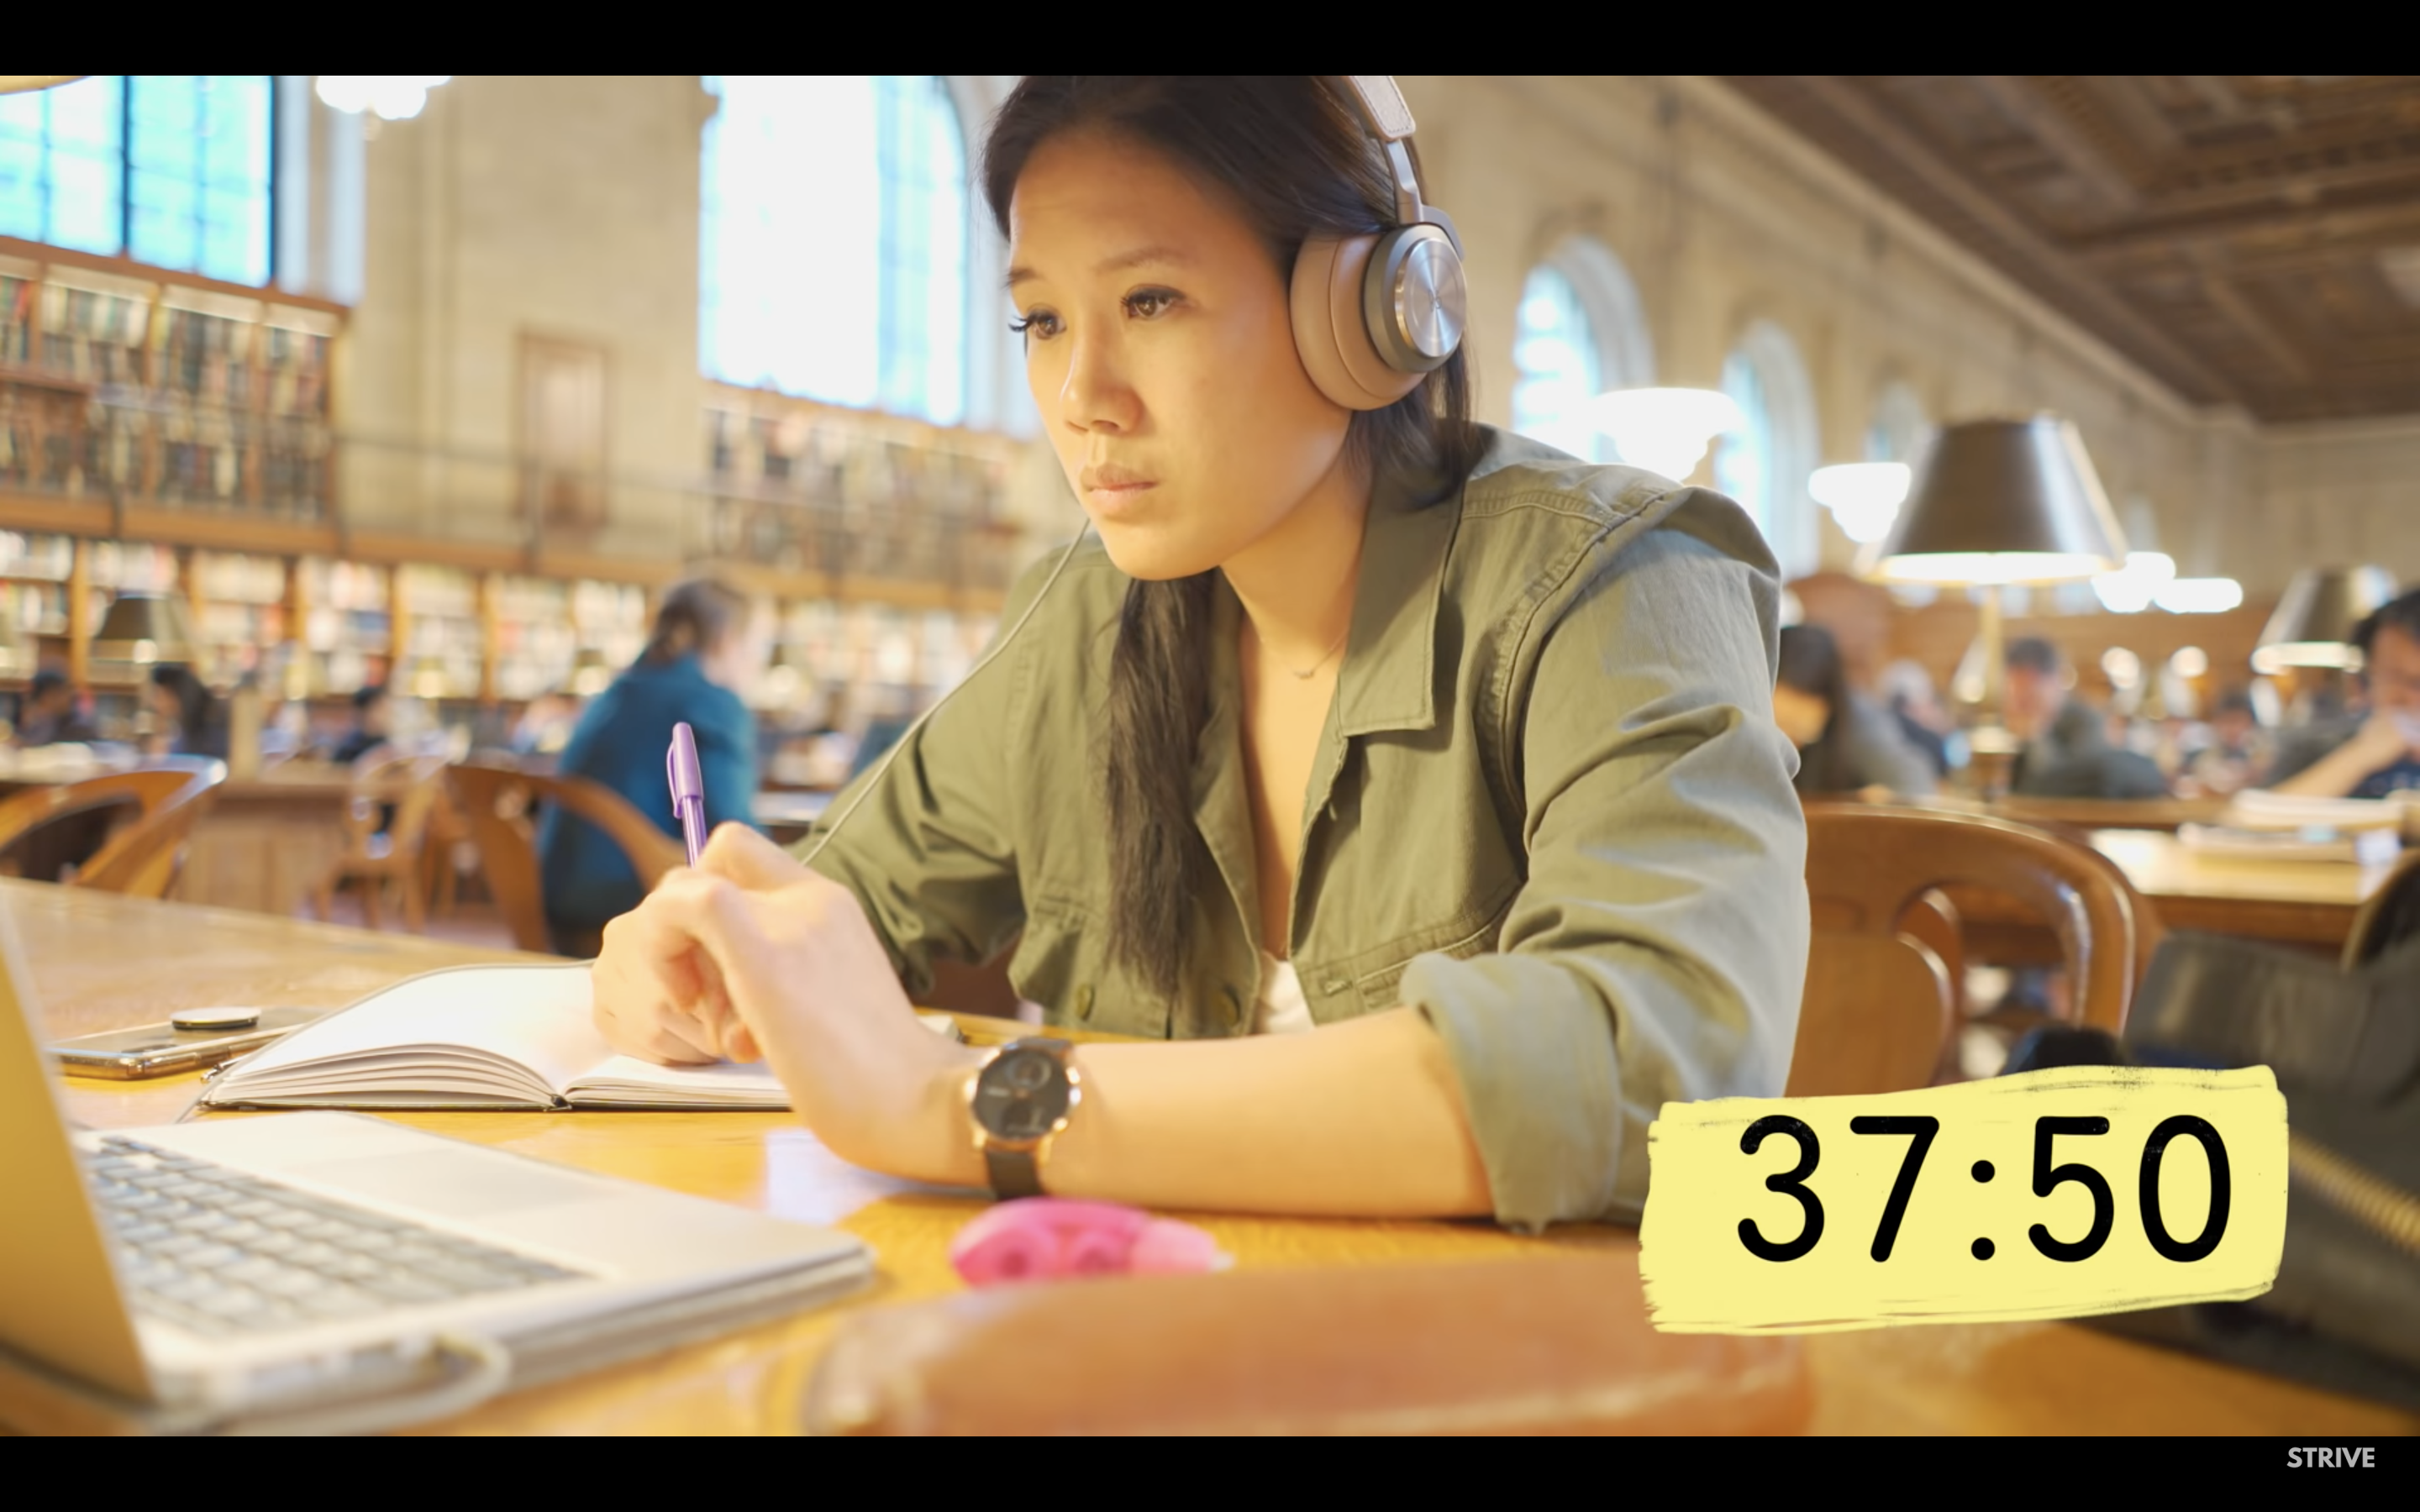 Screenshot of a library "study with me" video posted by TheStrive Studies. A woman is sitting at a table in a library while taking notes and looking at a computer, and a timer is in the bottom right corner of the screen reading "37:50".